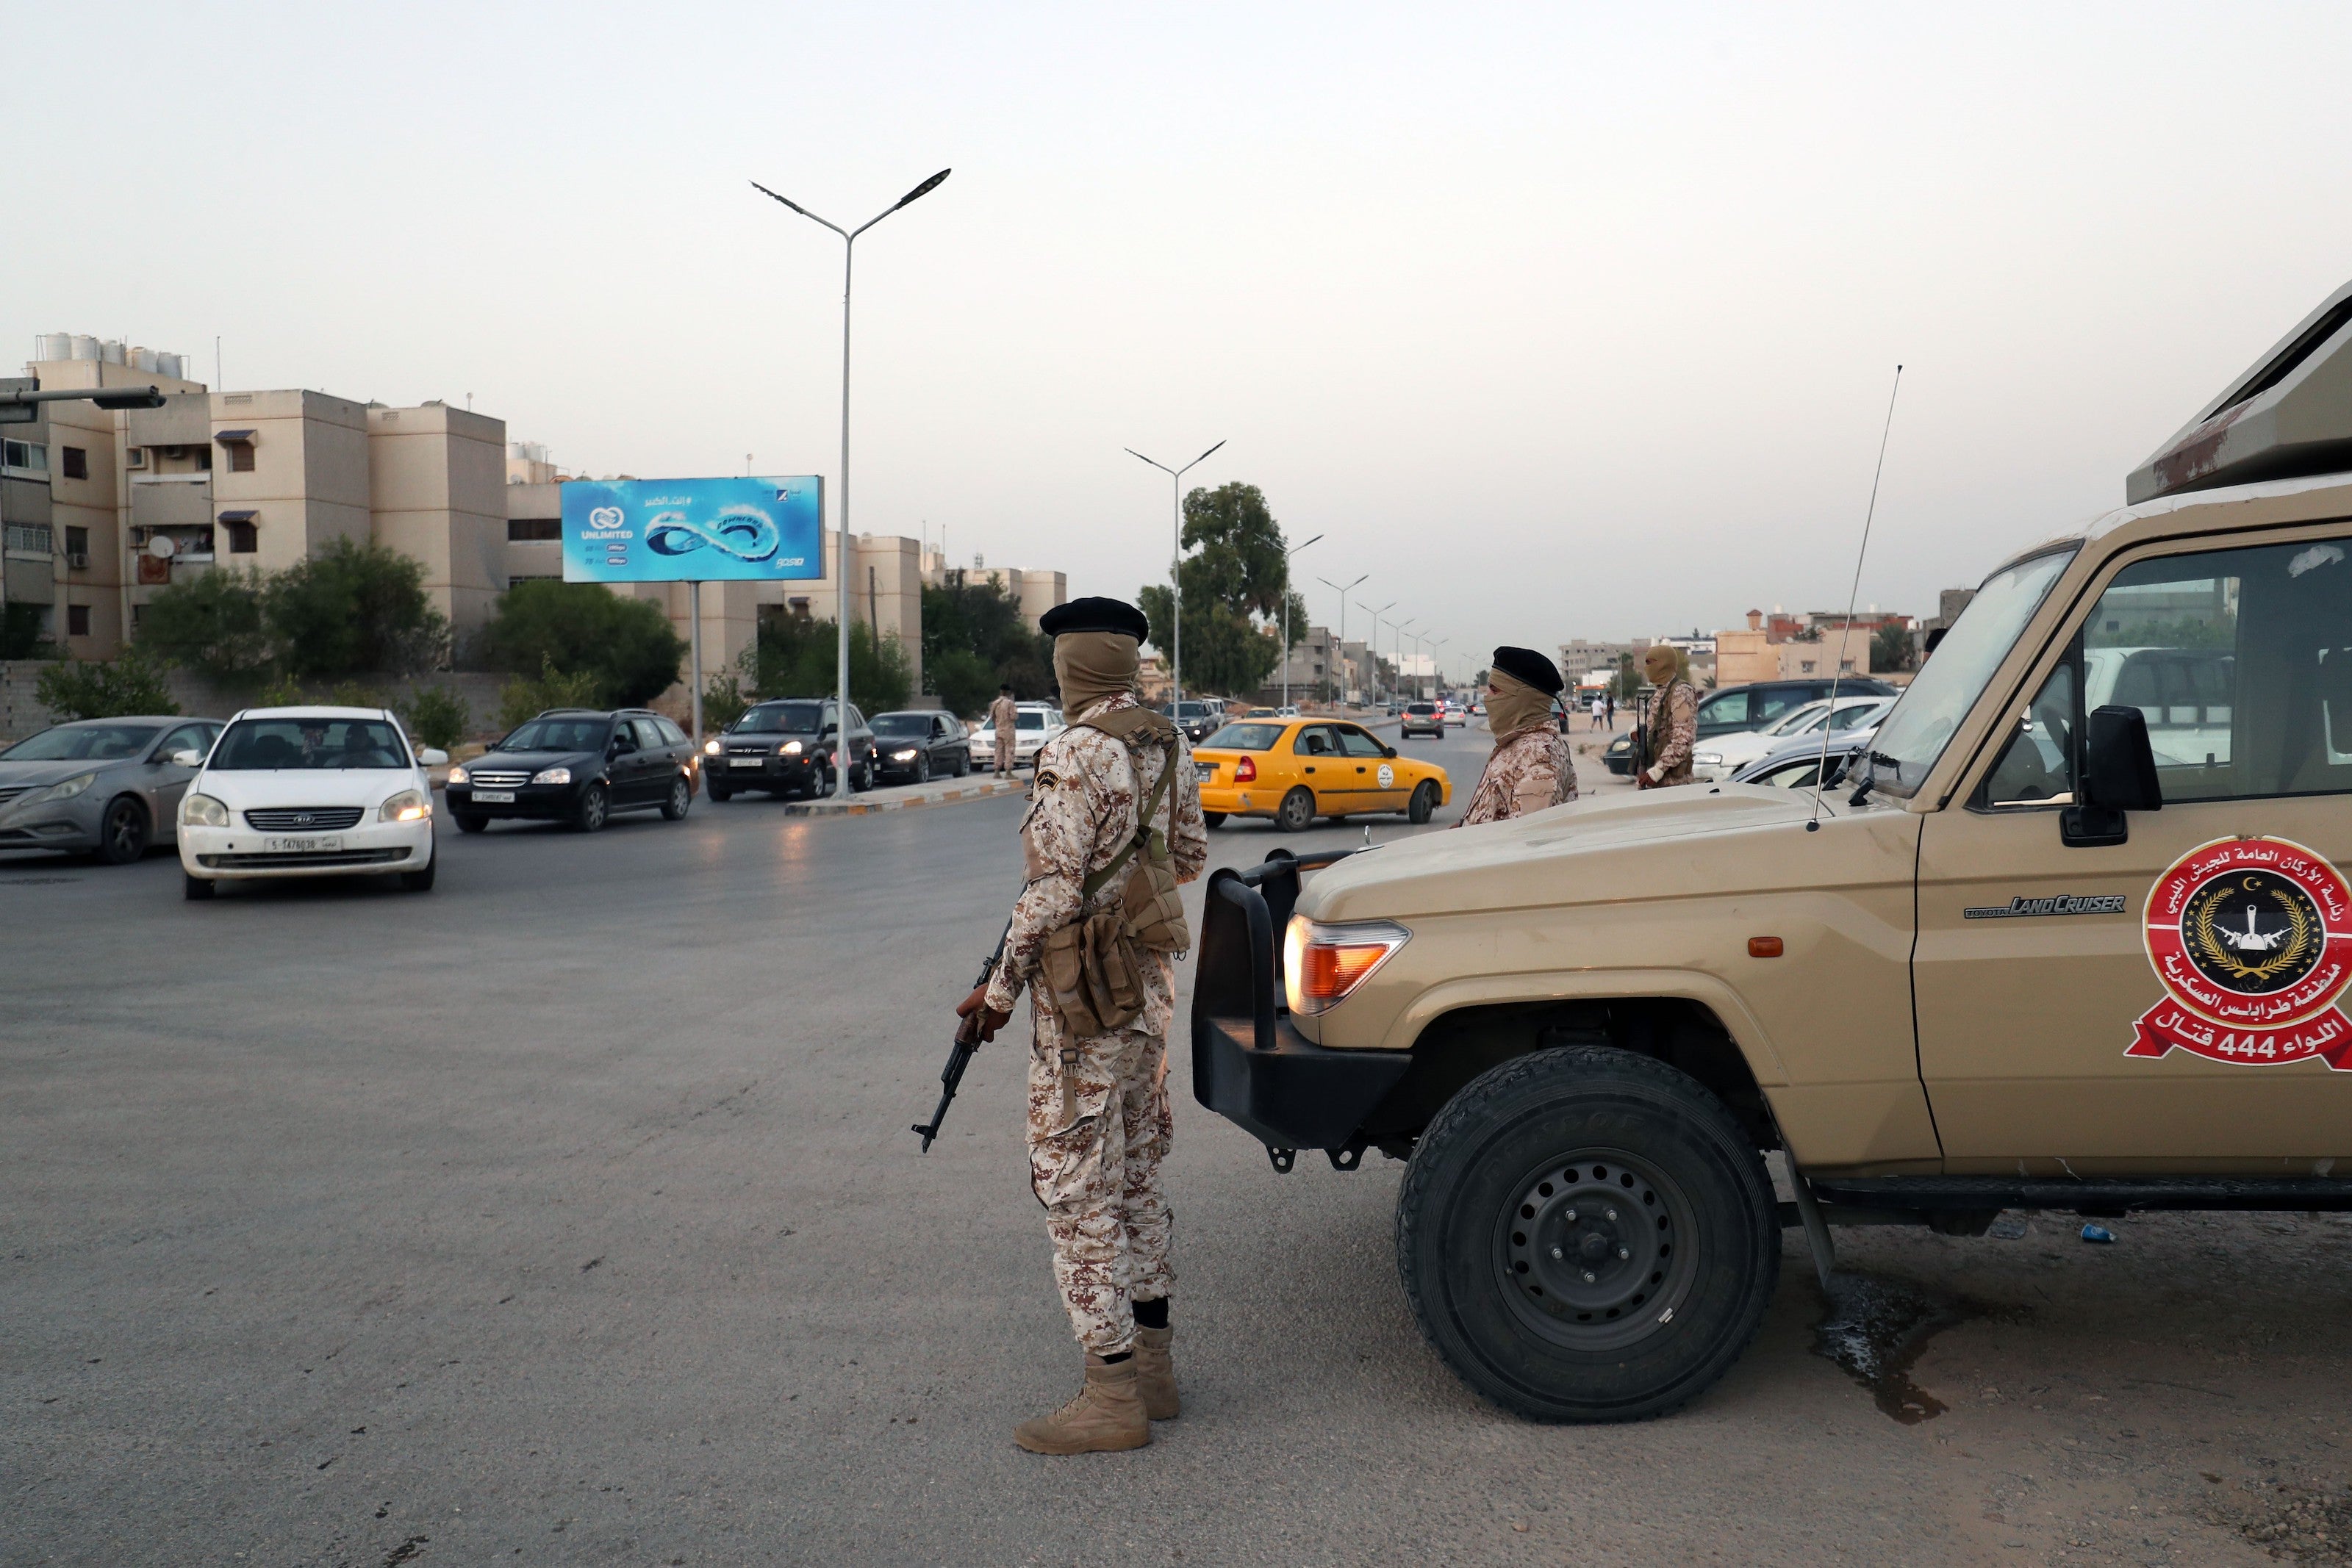 Members of Brigade 444, an armed group linked with the Tripoli Army Chief of Staff, patrol streets of Salaheddin in the southern suburbs of Tripoli.